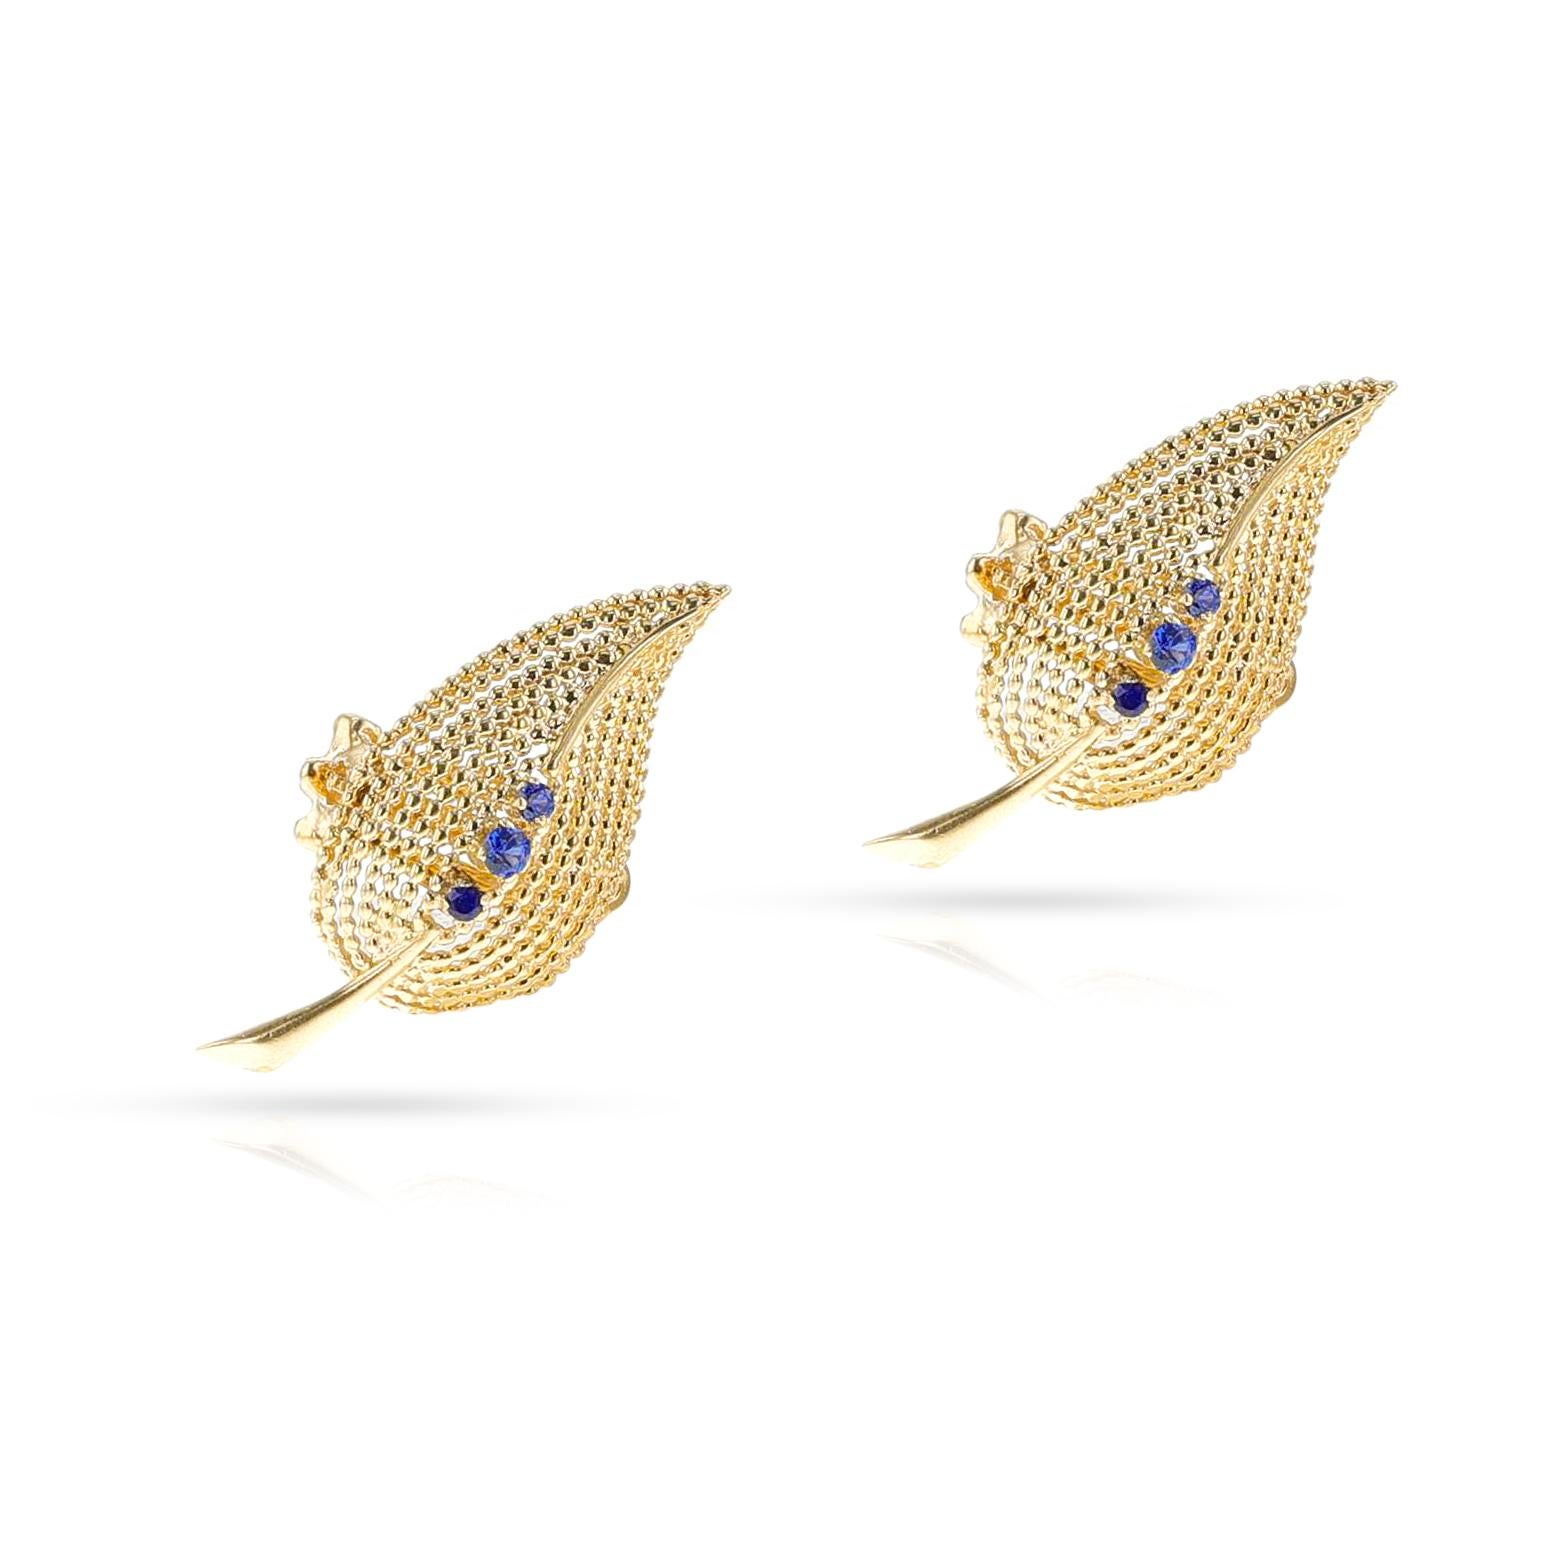 Tiffany & Co. Sapphire Leaf Earrings, 18k In Excellent Condition For Sale In New York, NY